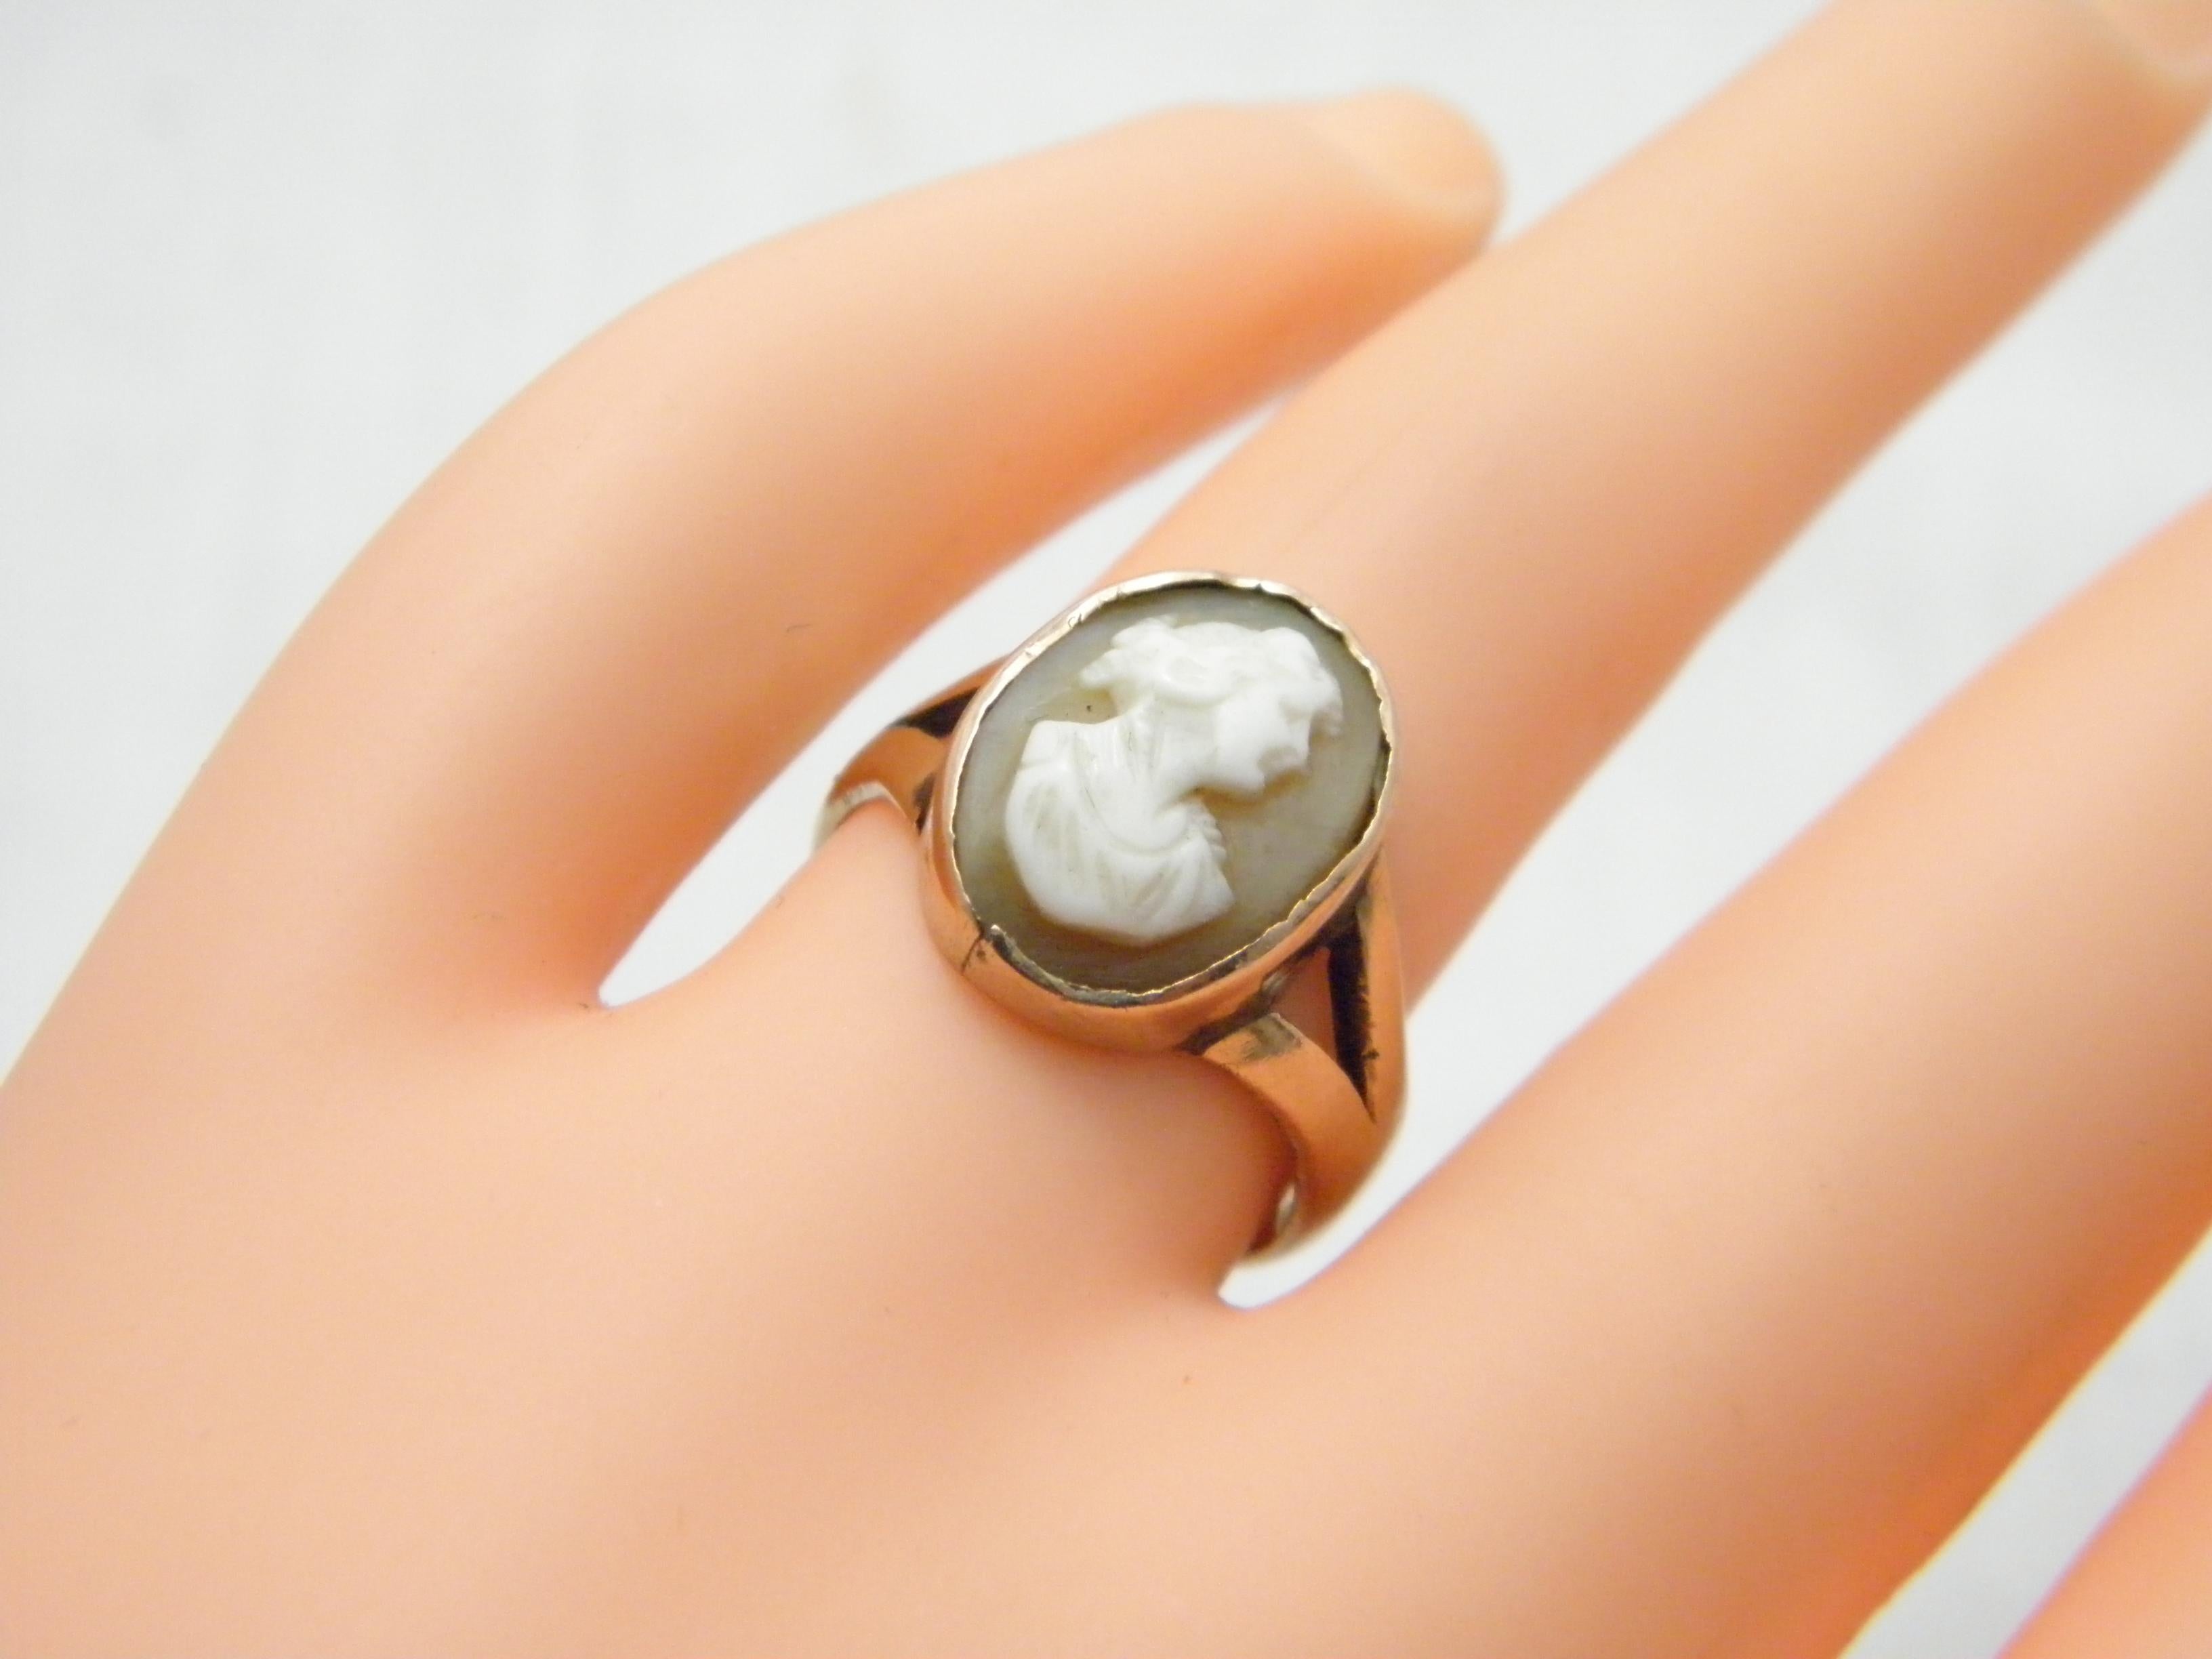 If you have landed on this page then you have an eye for beauty.

On offer is this gorgeous

15CT ROSE GOLD ANTIQUE HARDSTONE CAMEO SIGNET RING

DETAILS
Material: 15ct 625/000 Rose Gold
This ring has a thick and sturdy shank hence ideal if resizing